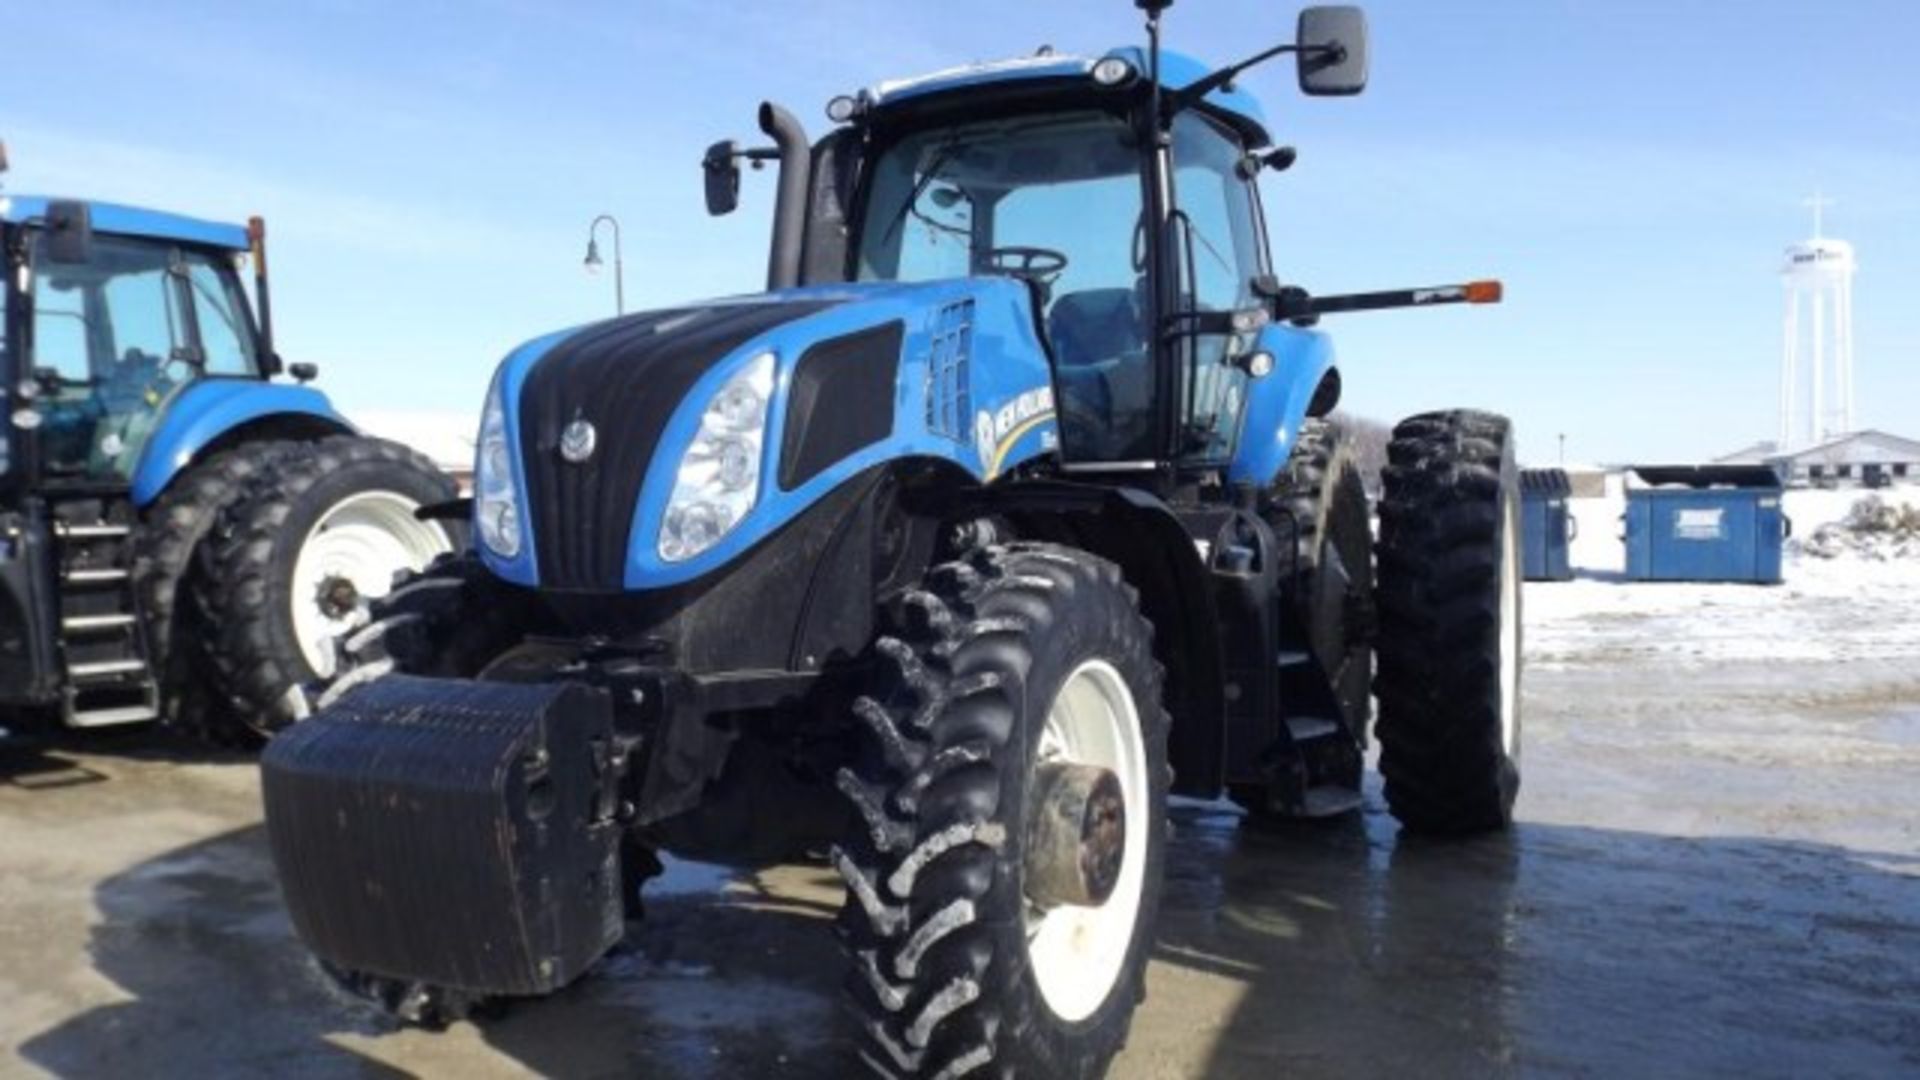 New Holland T8.275 Tractor '12, sn#ZCRC03823 2101 Hrs, MFWD, Deluxe Cab, Buddy Seat, 235 HP, 18/4 - Image 2 of 18